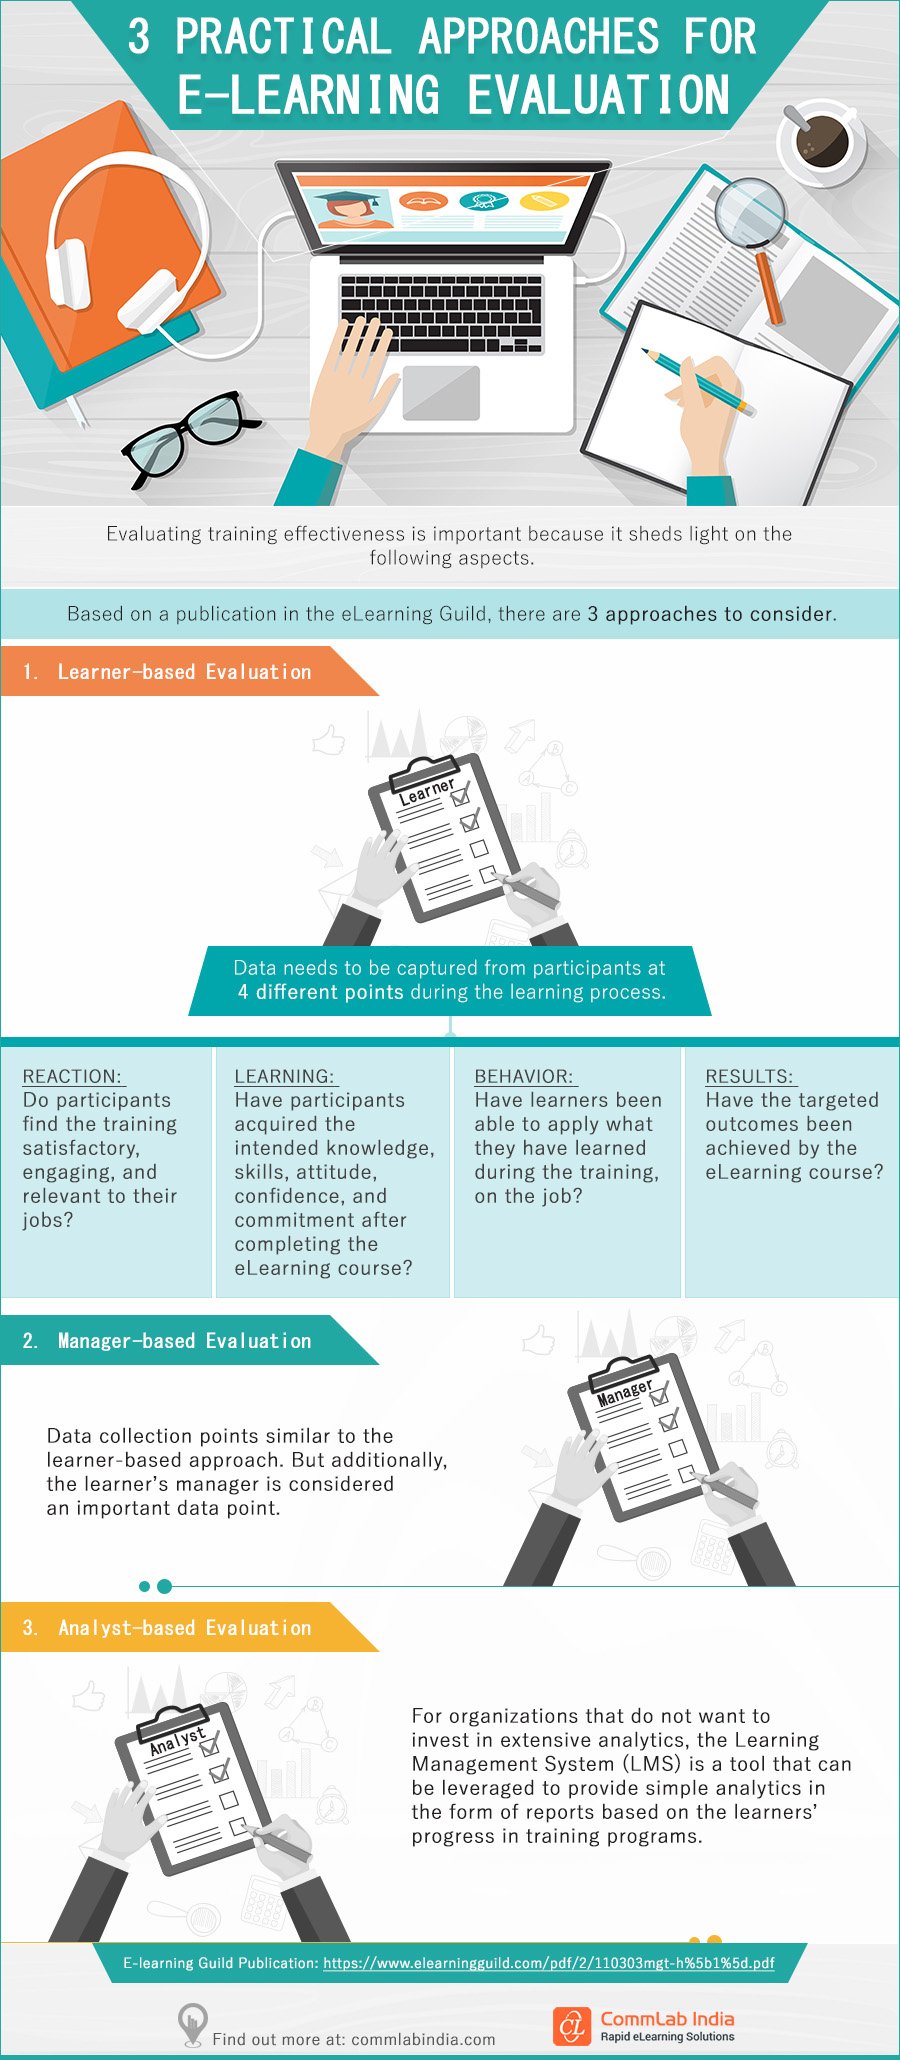 3 Practical Approaches for E-learning Evaluation [Infographic]